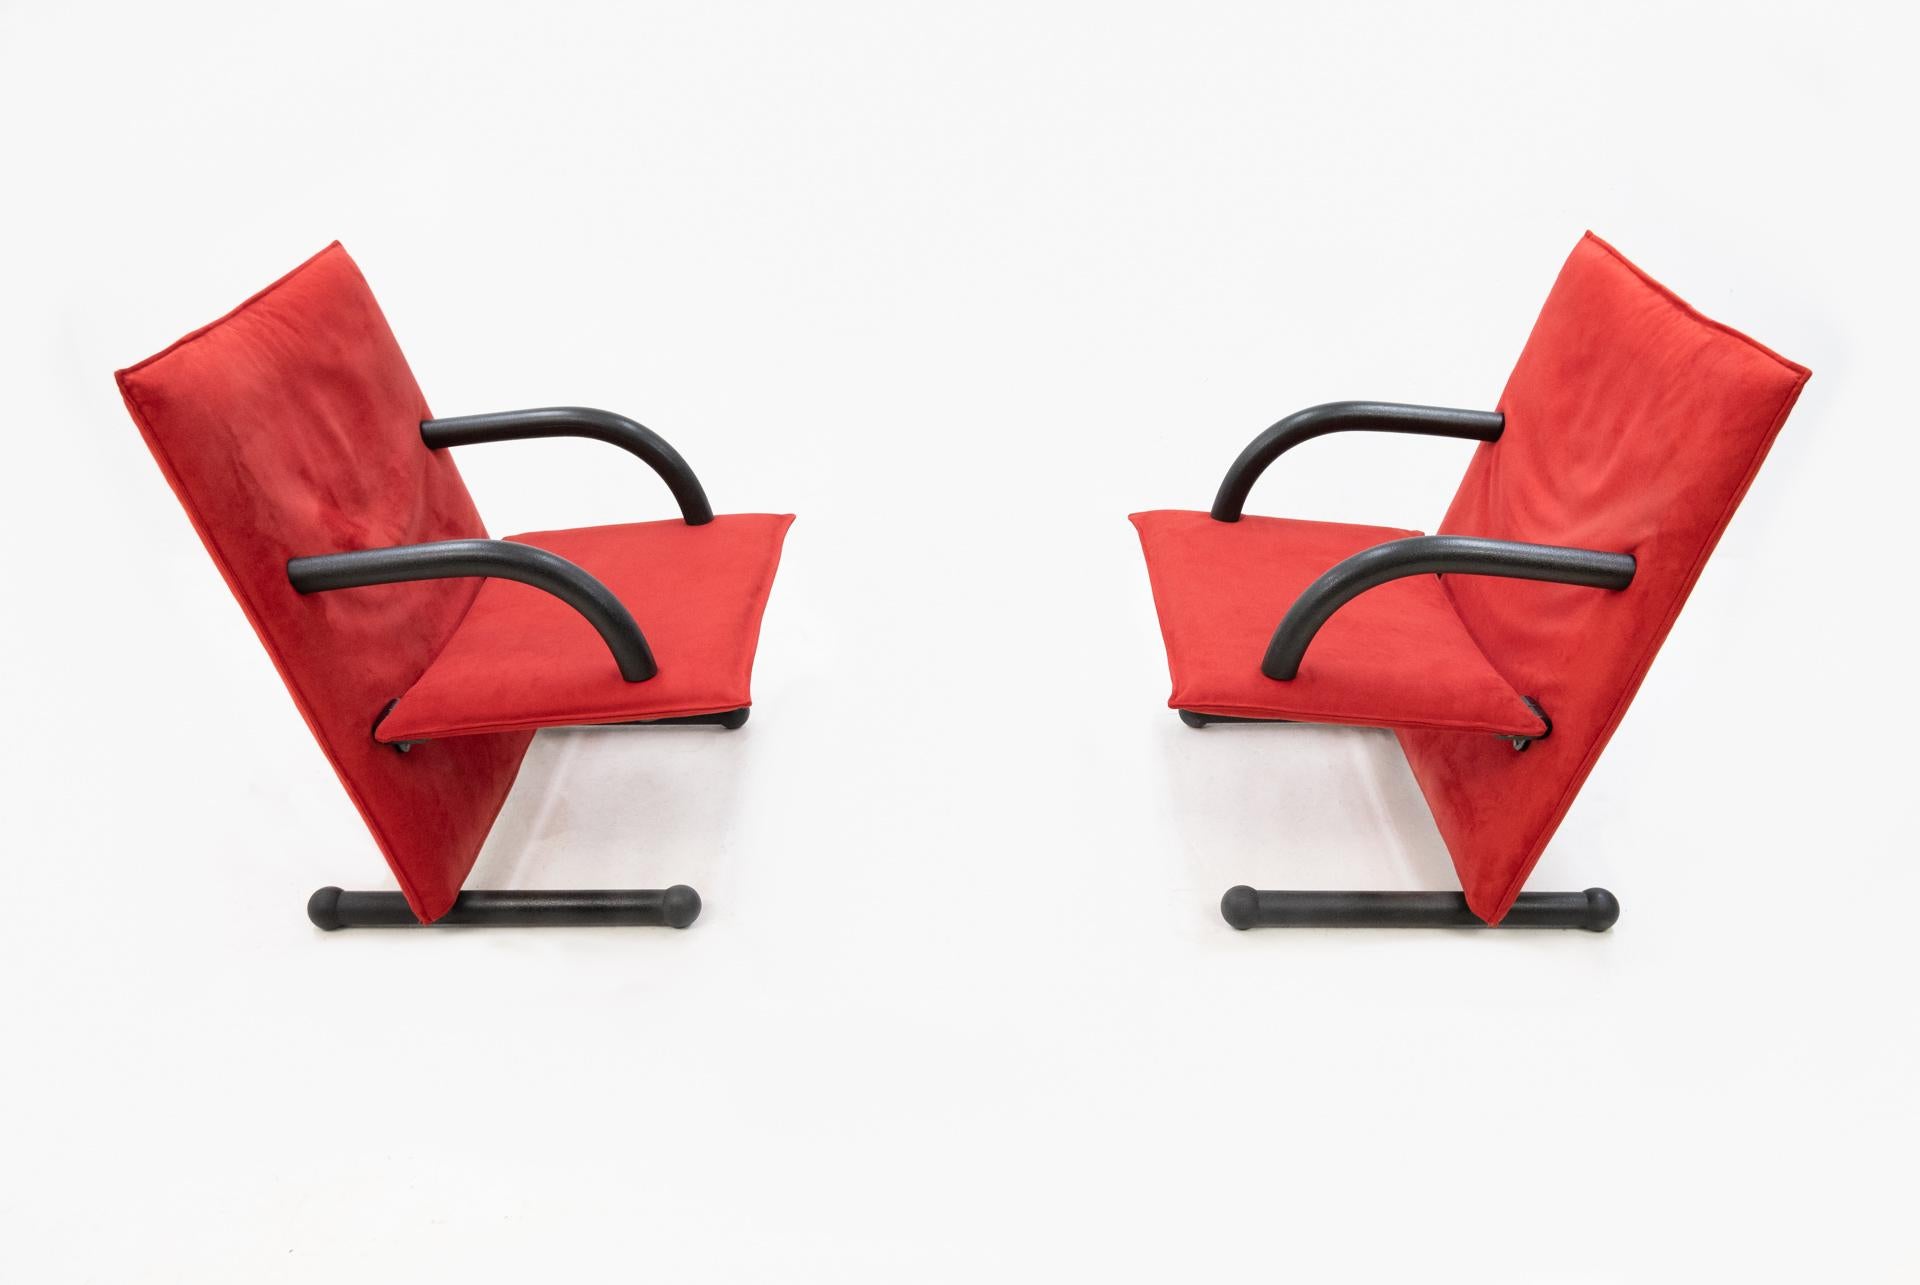 T Line Lounge Chairs Arflex, 1980s In Good Condition For Sale In Den Haag, NL